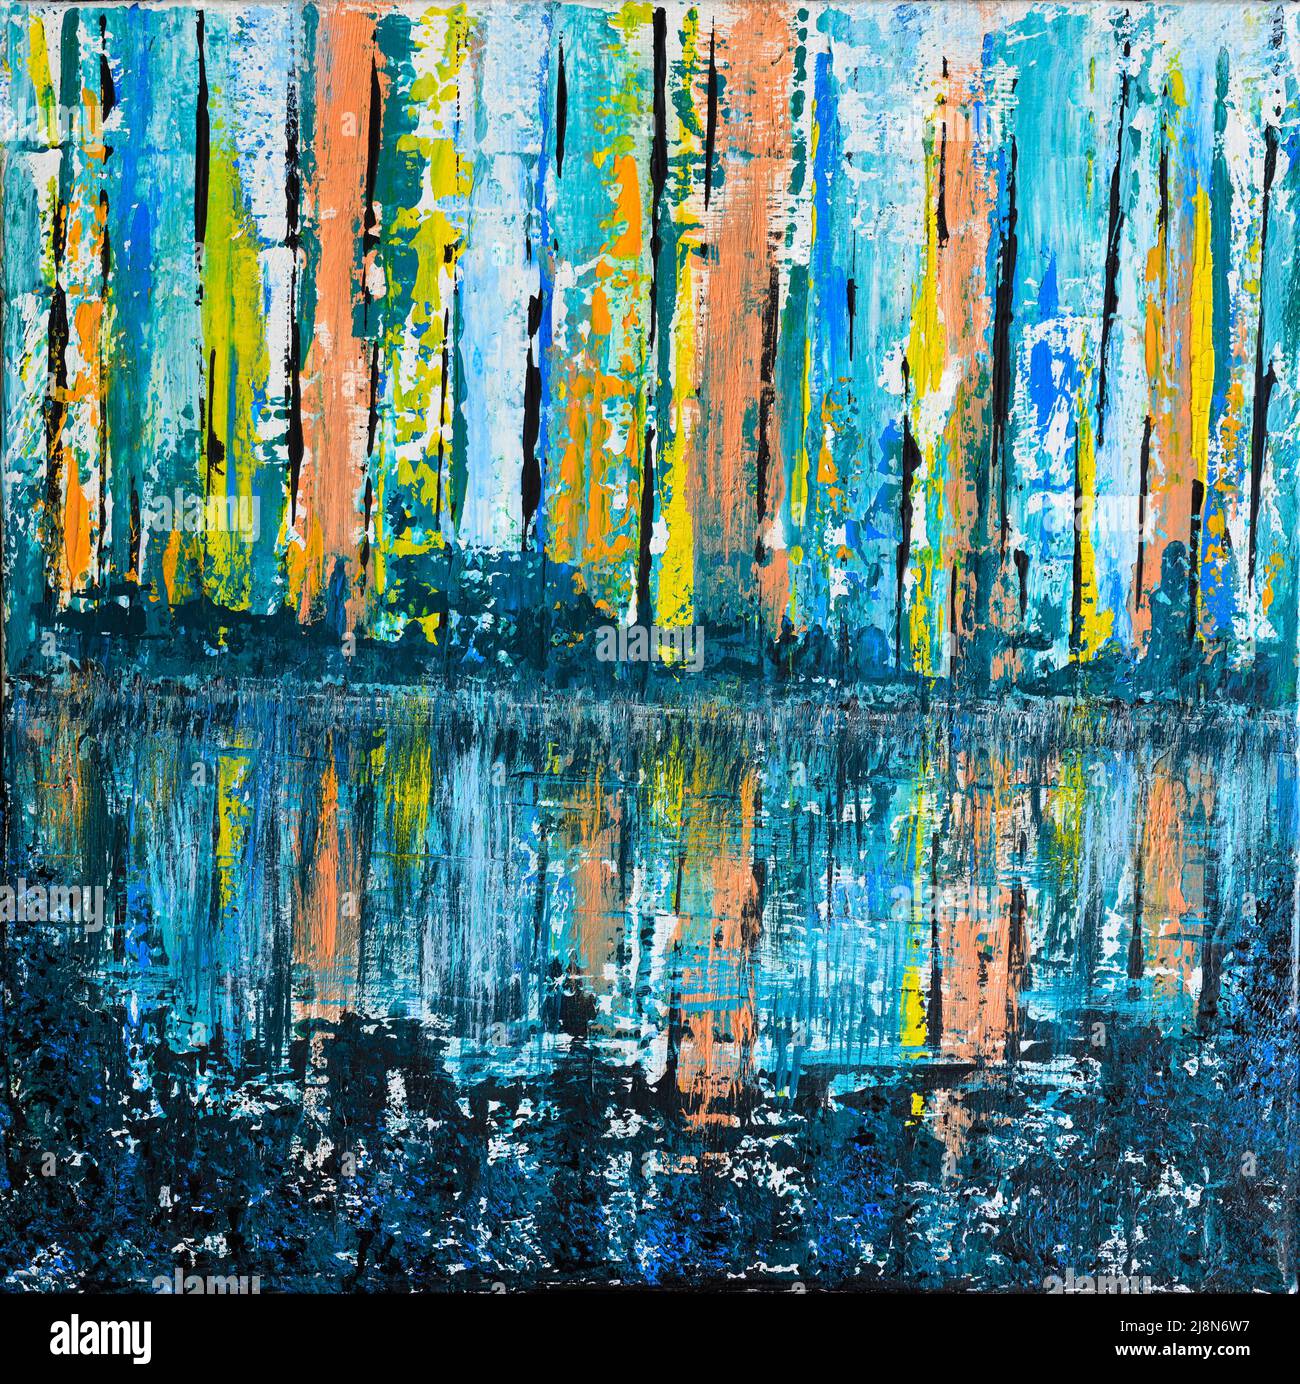 Abstract acrylic painting on square canvas made with palette knife streaks in blue yellow orange pond reflections Stock Photo